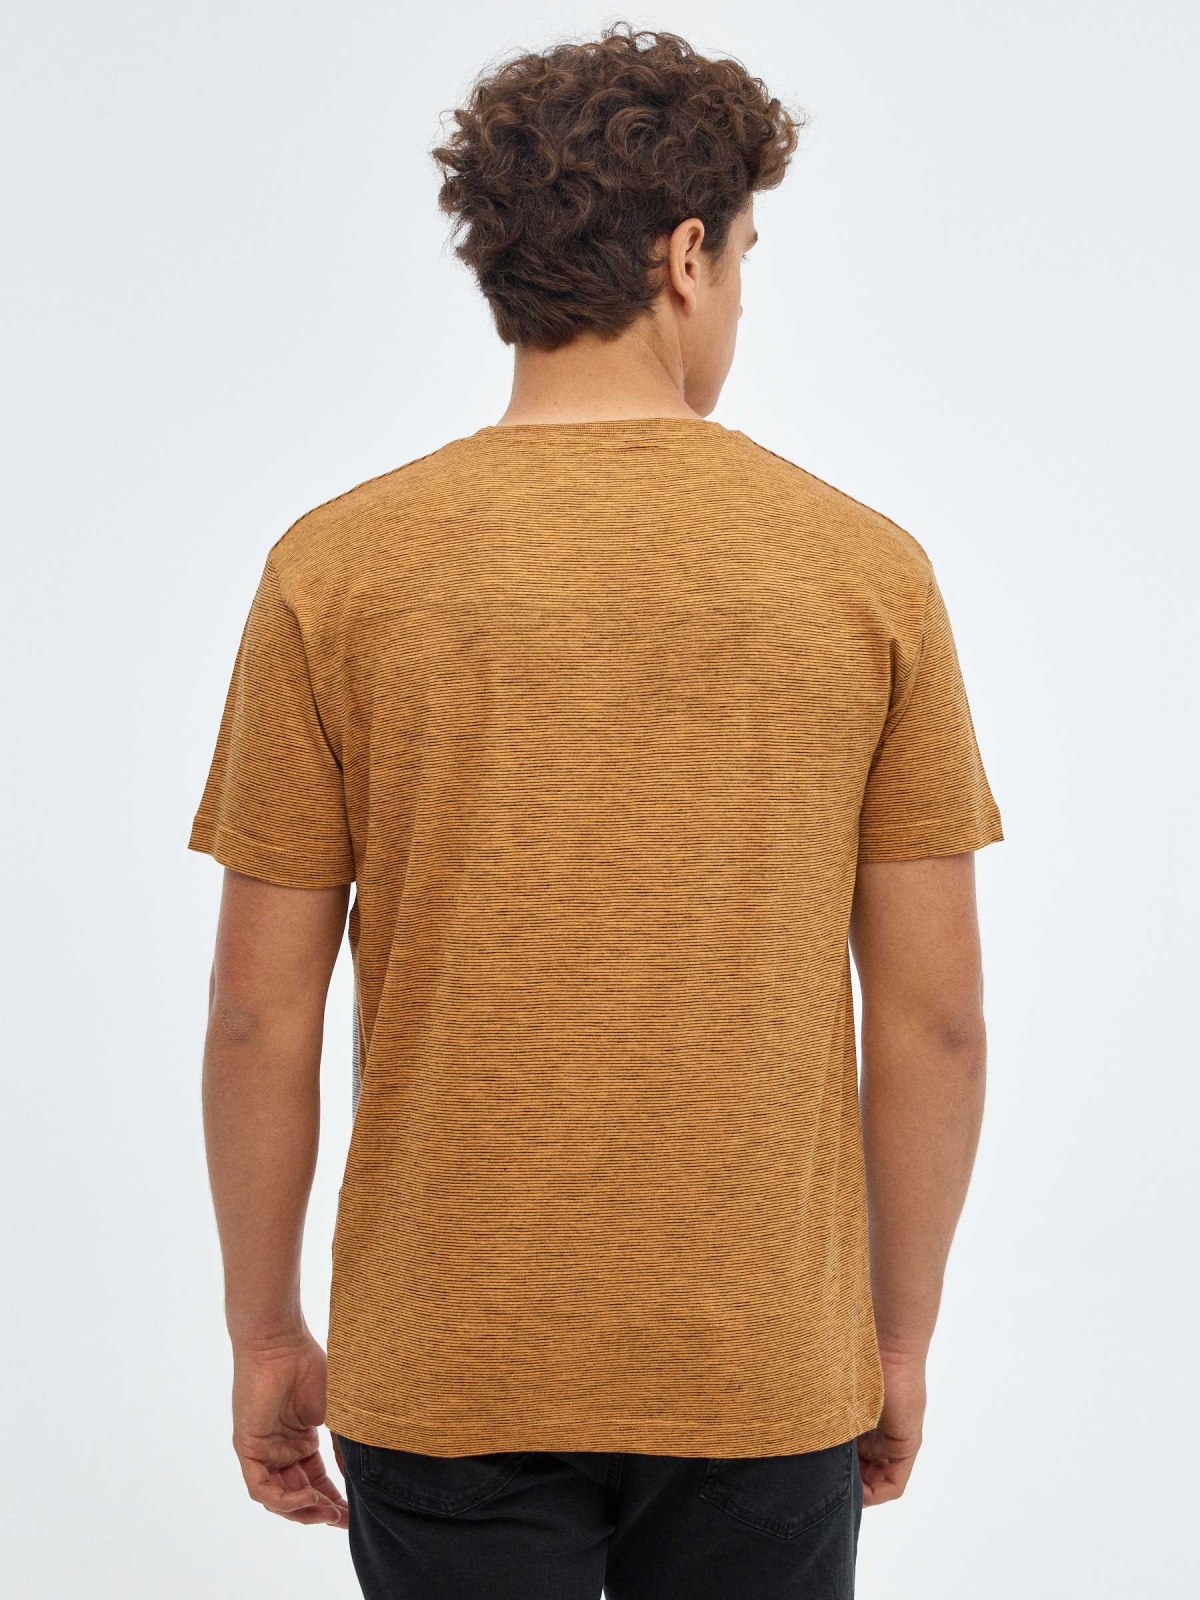 Pluviophile T-shirt ochre middle back view